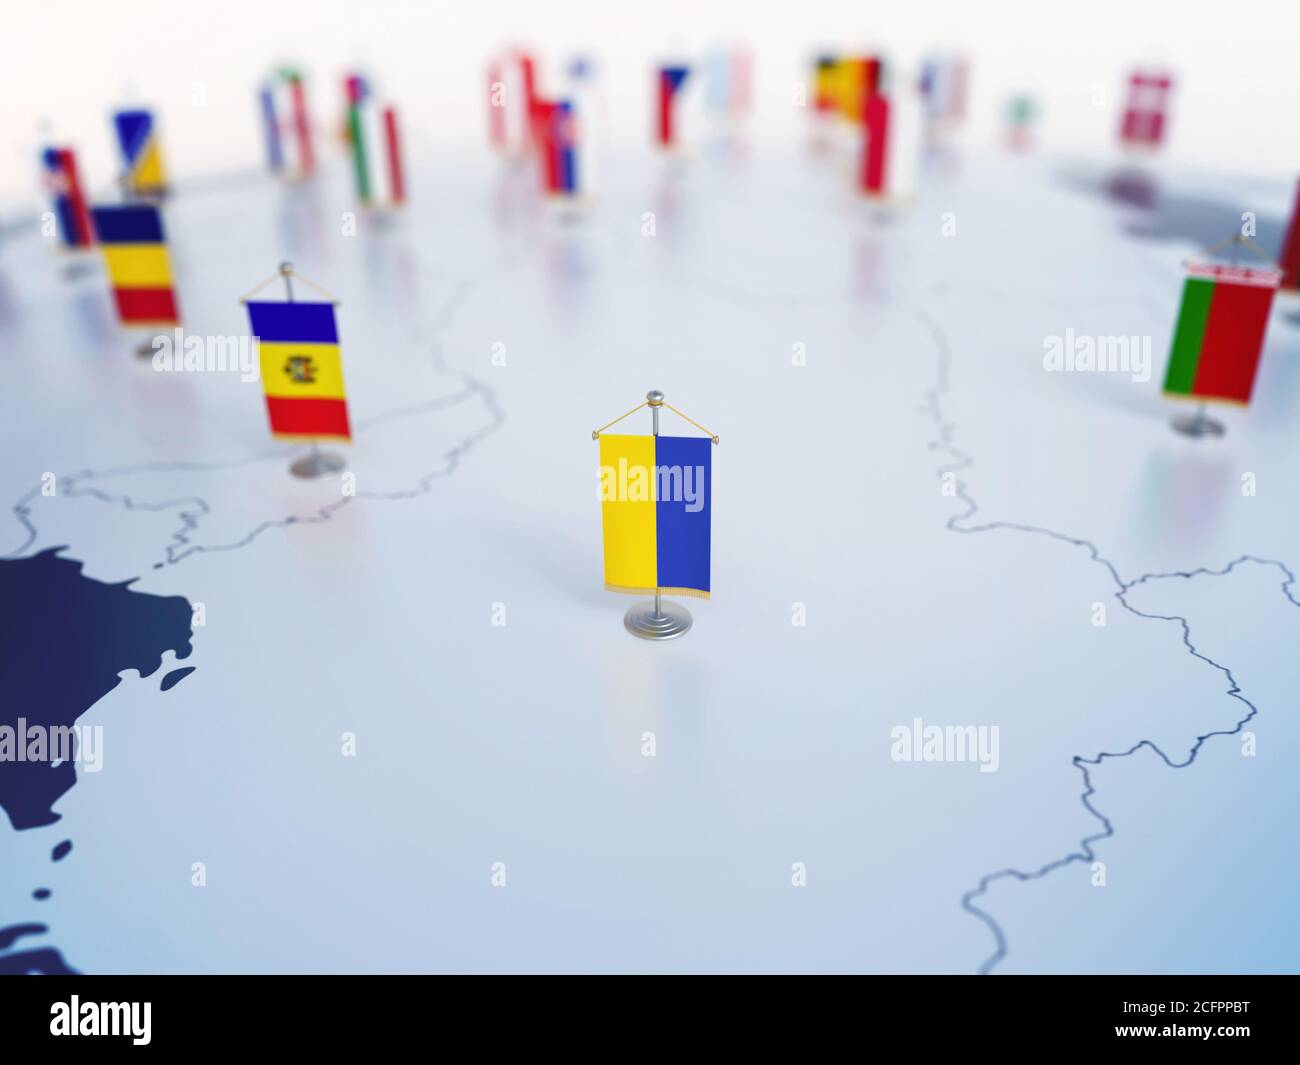 Flag Of Ukraine In Focus Among Other European Countries Flags Europe